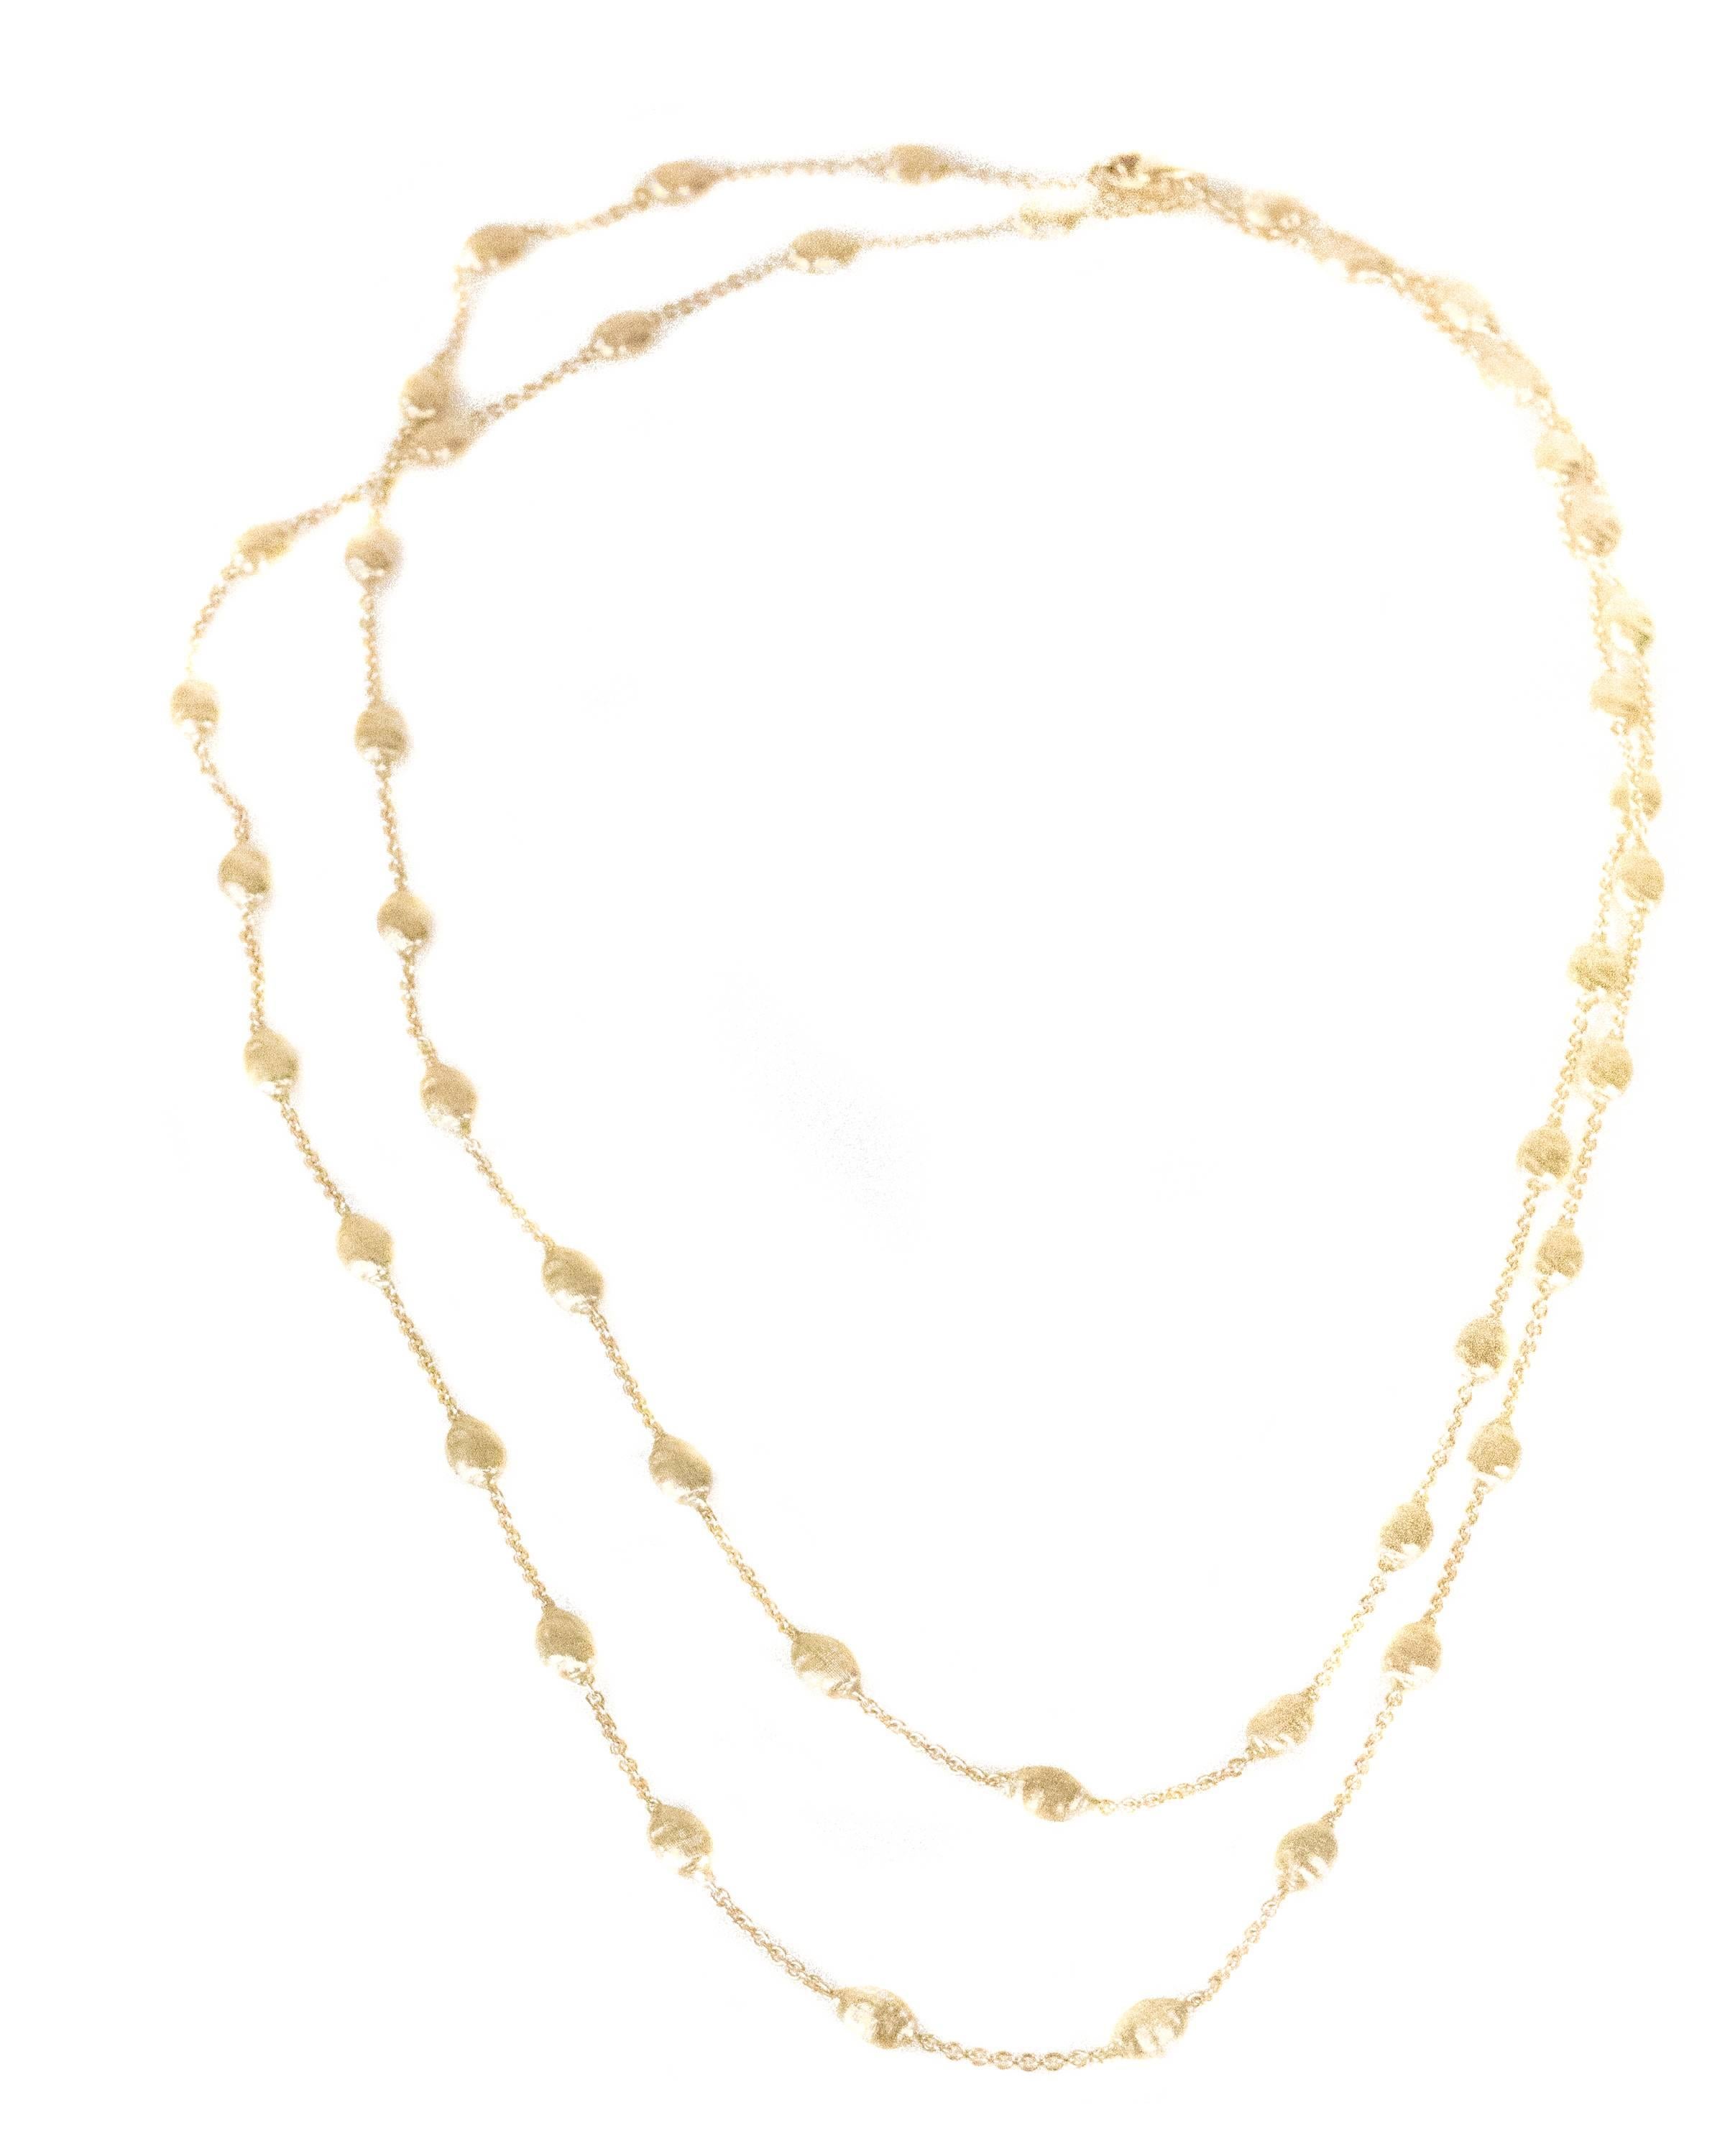 Marco Bicego, Siviglia Collection, 18 Karat Yellow Gold Small Bead Necklace, 39 1/4 inches long

Italian jewelry Designer Marco Bicego finds his inspiration in his natural surroundings. The ancient cobblestones of Seville inspired Bicego to create